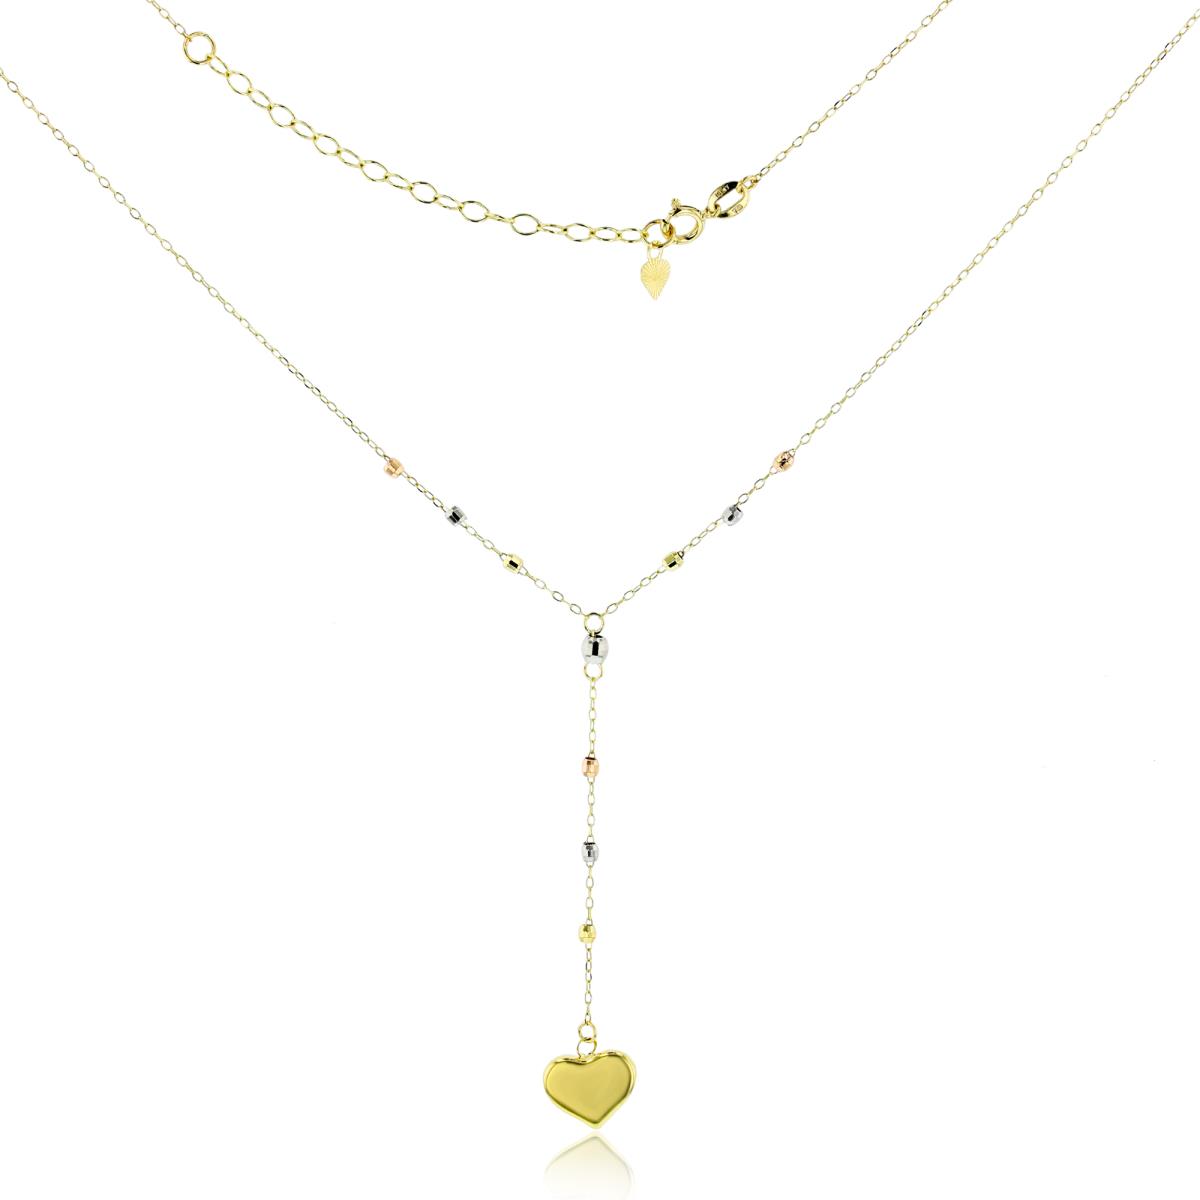 14K Tricolor Gold DC Cable Chain with Mirror Beads & Dangling Polished Puff Heart 16+2" Necklace